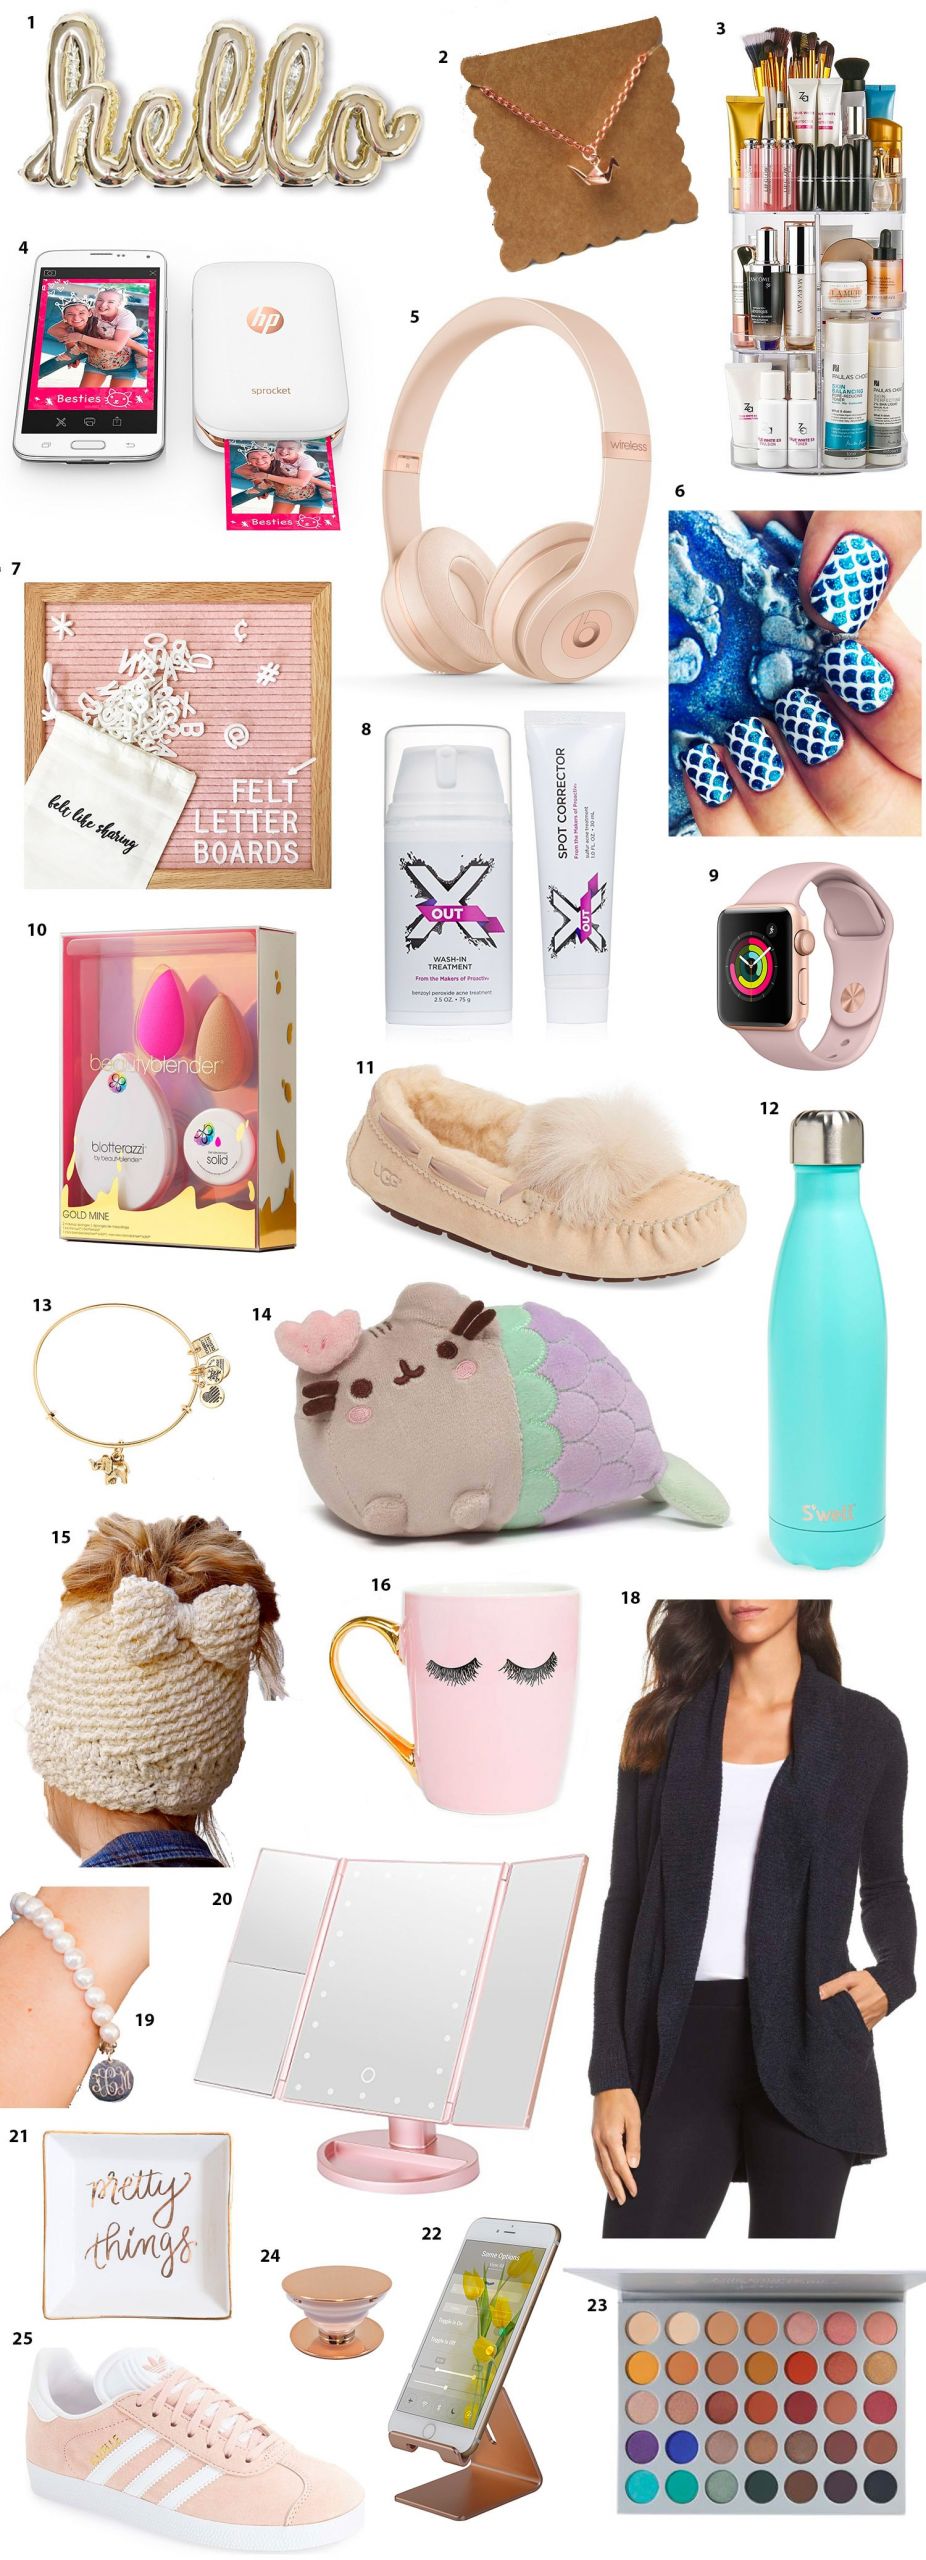 Teen Girls Gift Ideas
 Top Gifts for Teens This Christmas